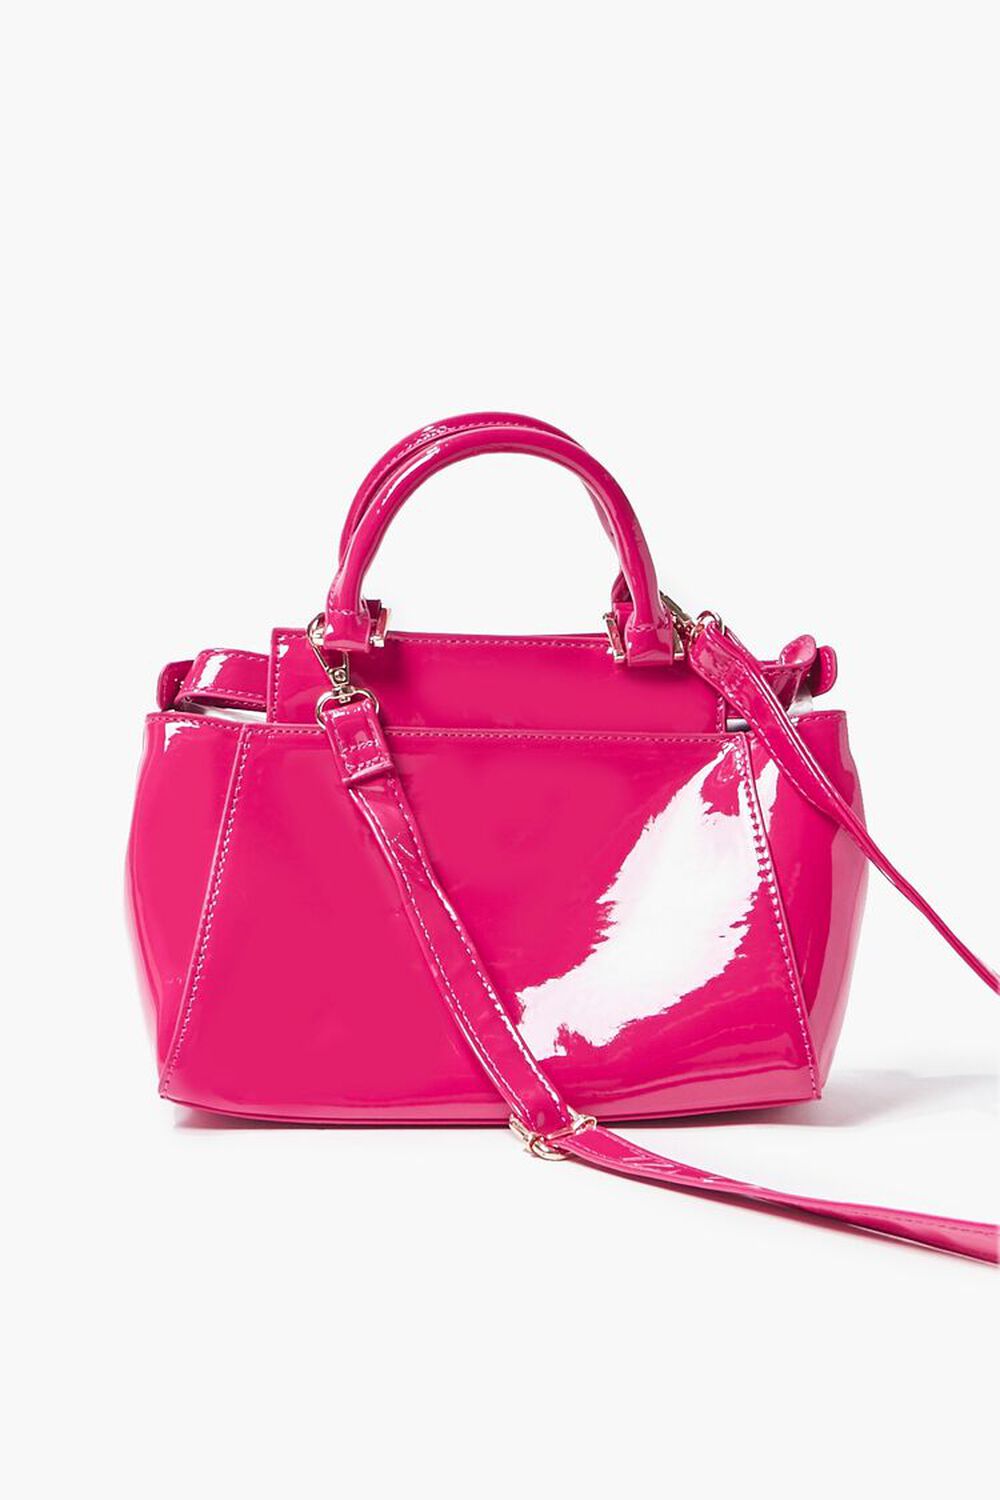 PINK Faux Patent Leather Crossbody Bag, image 3